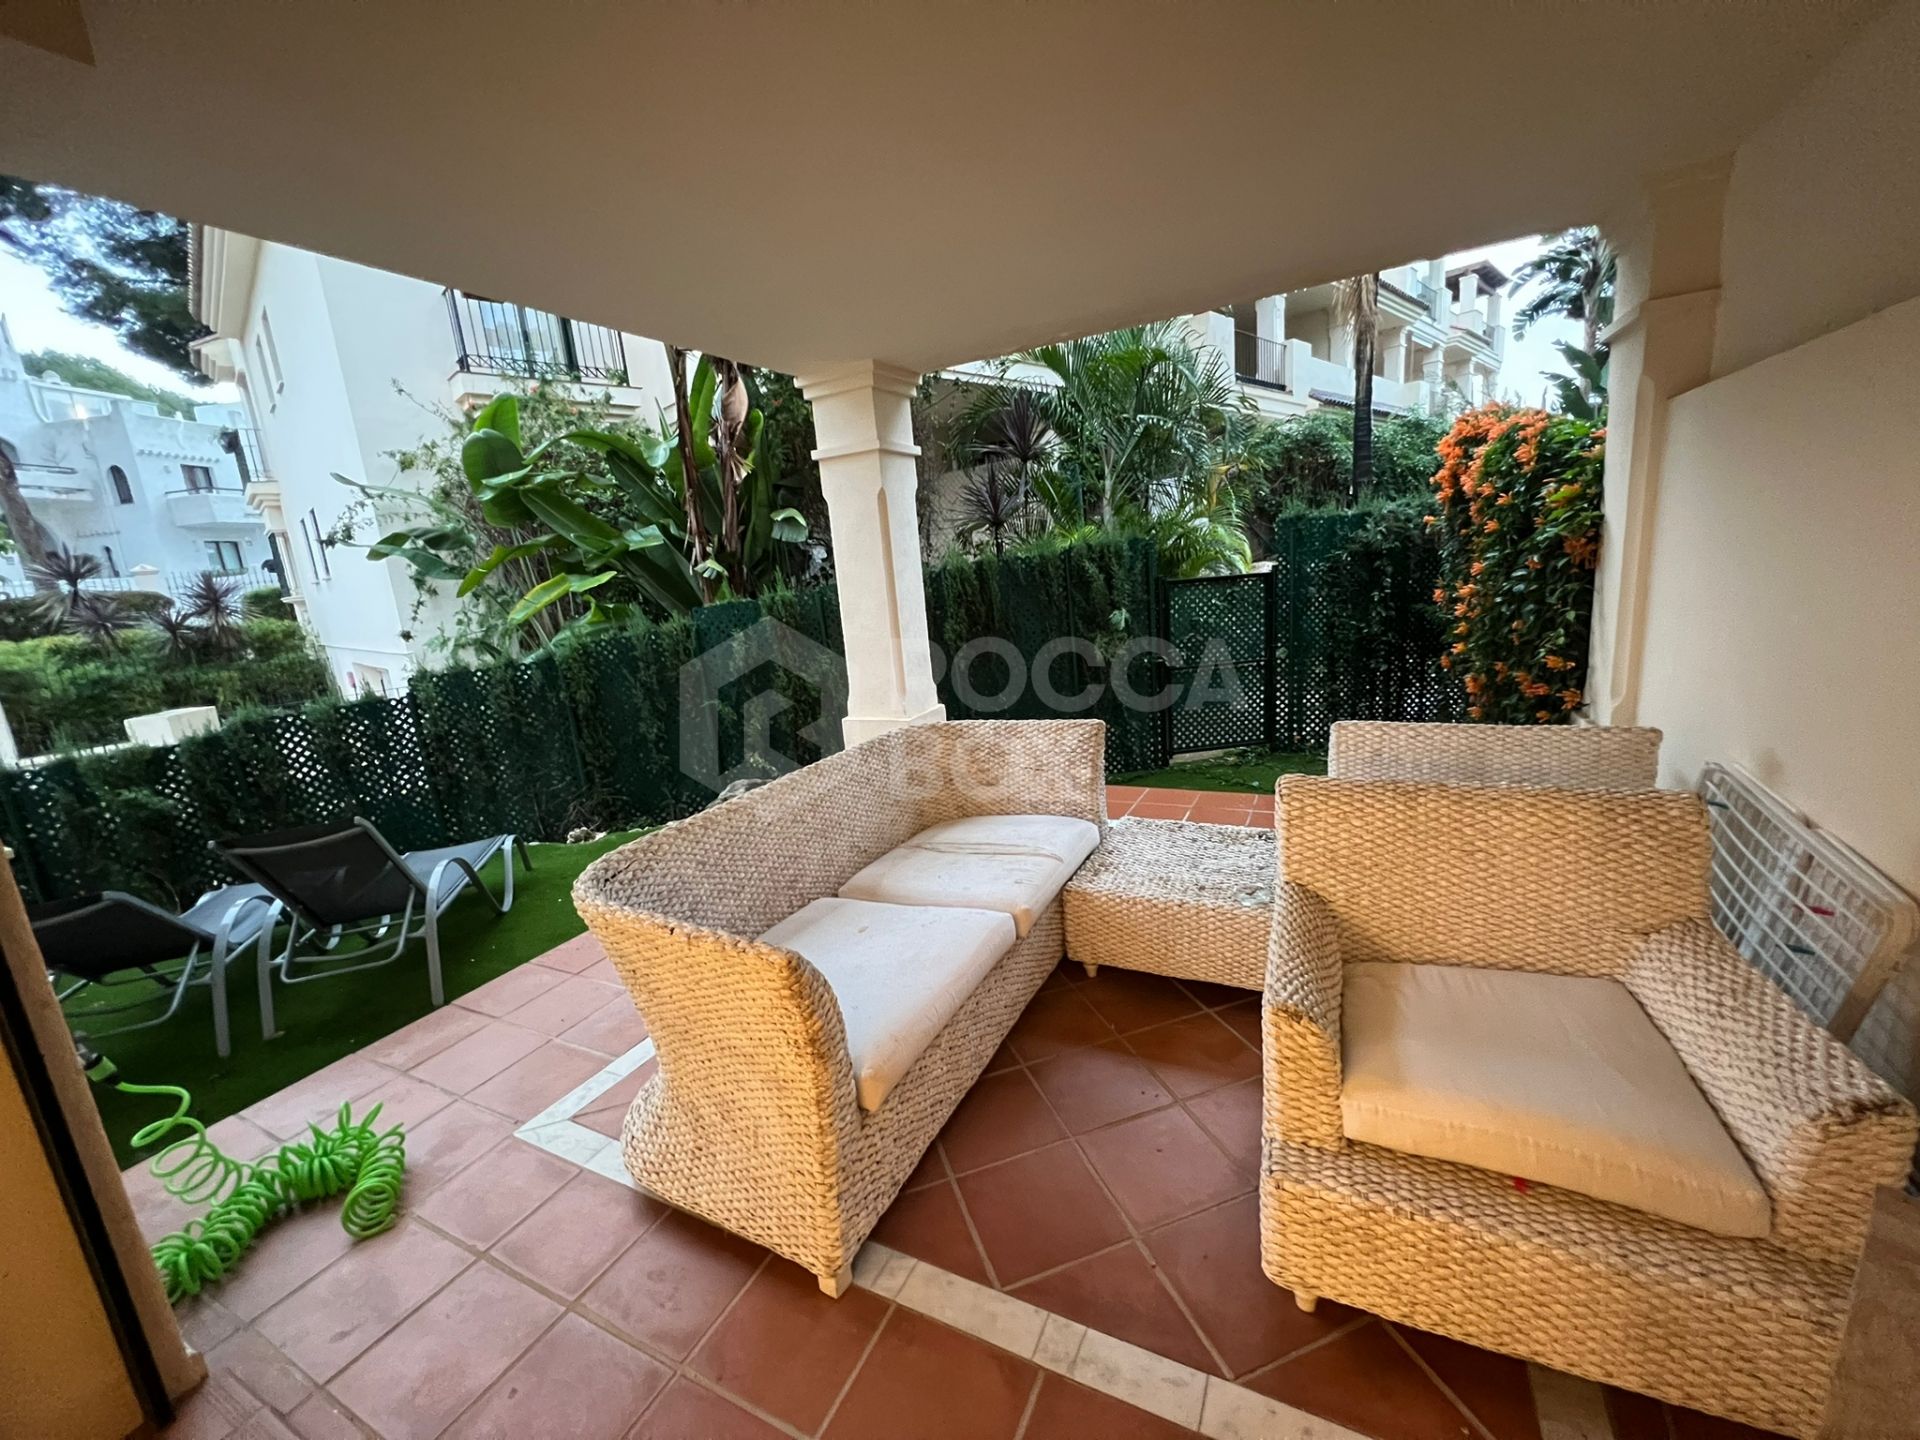 2 beds ground-floor apartment with private terrace